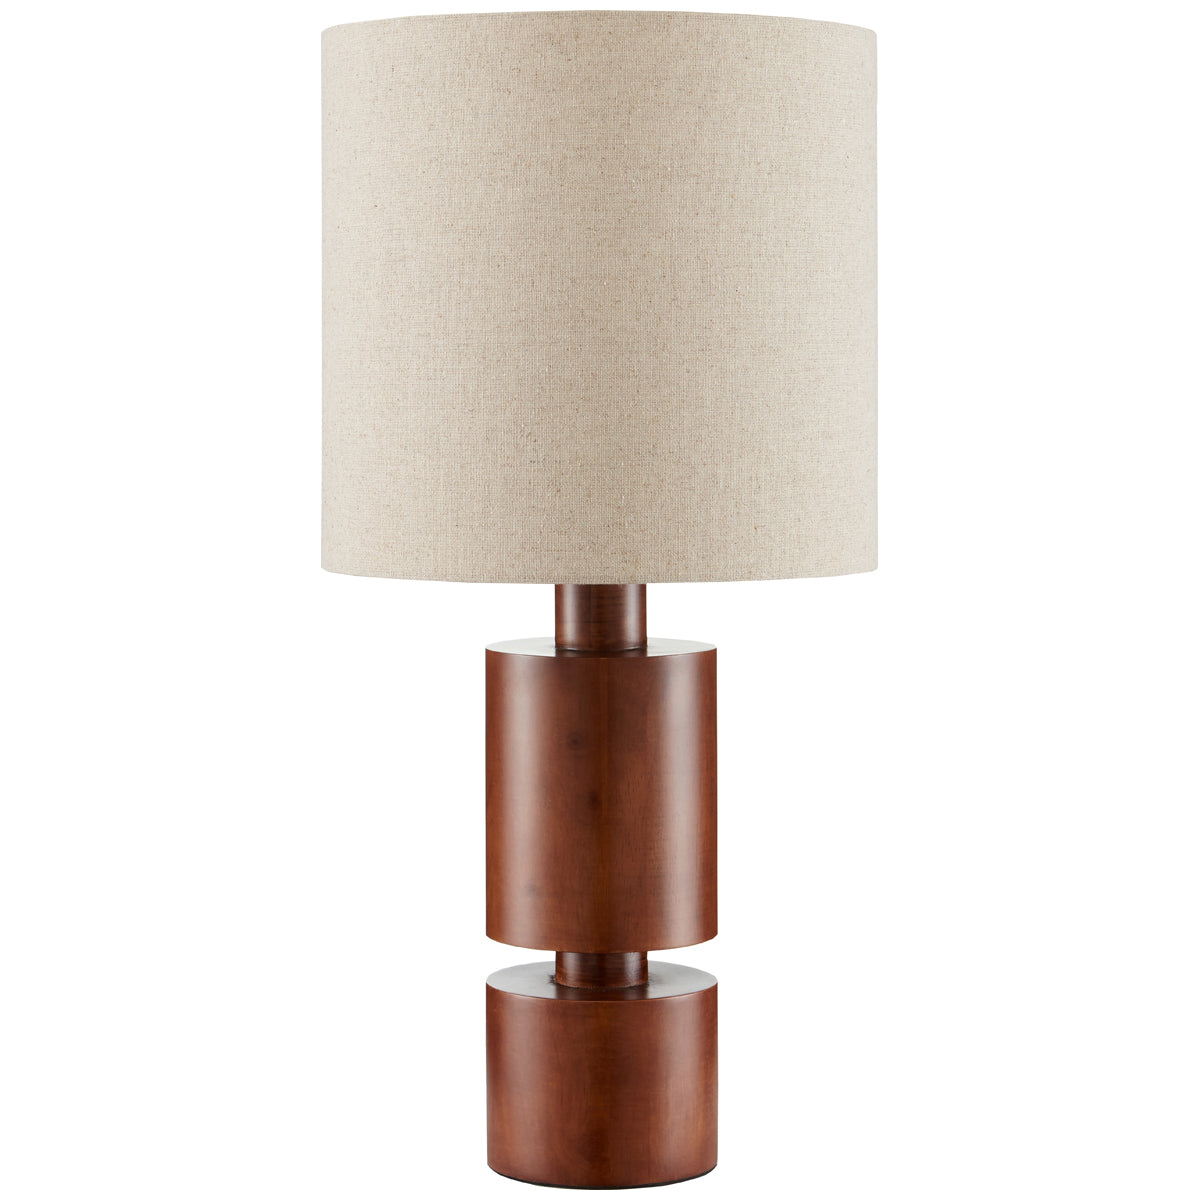 Currey and Company Vero Table Lamp